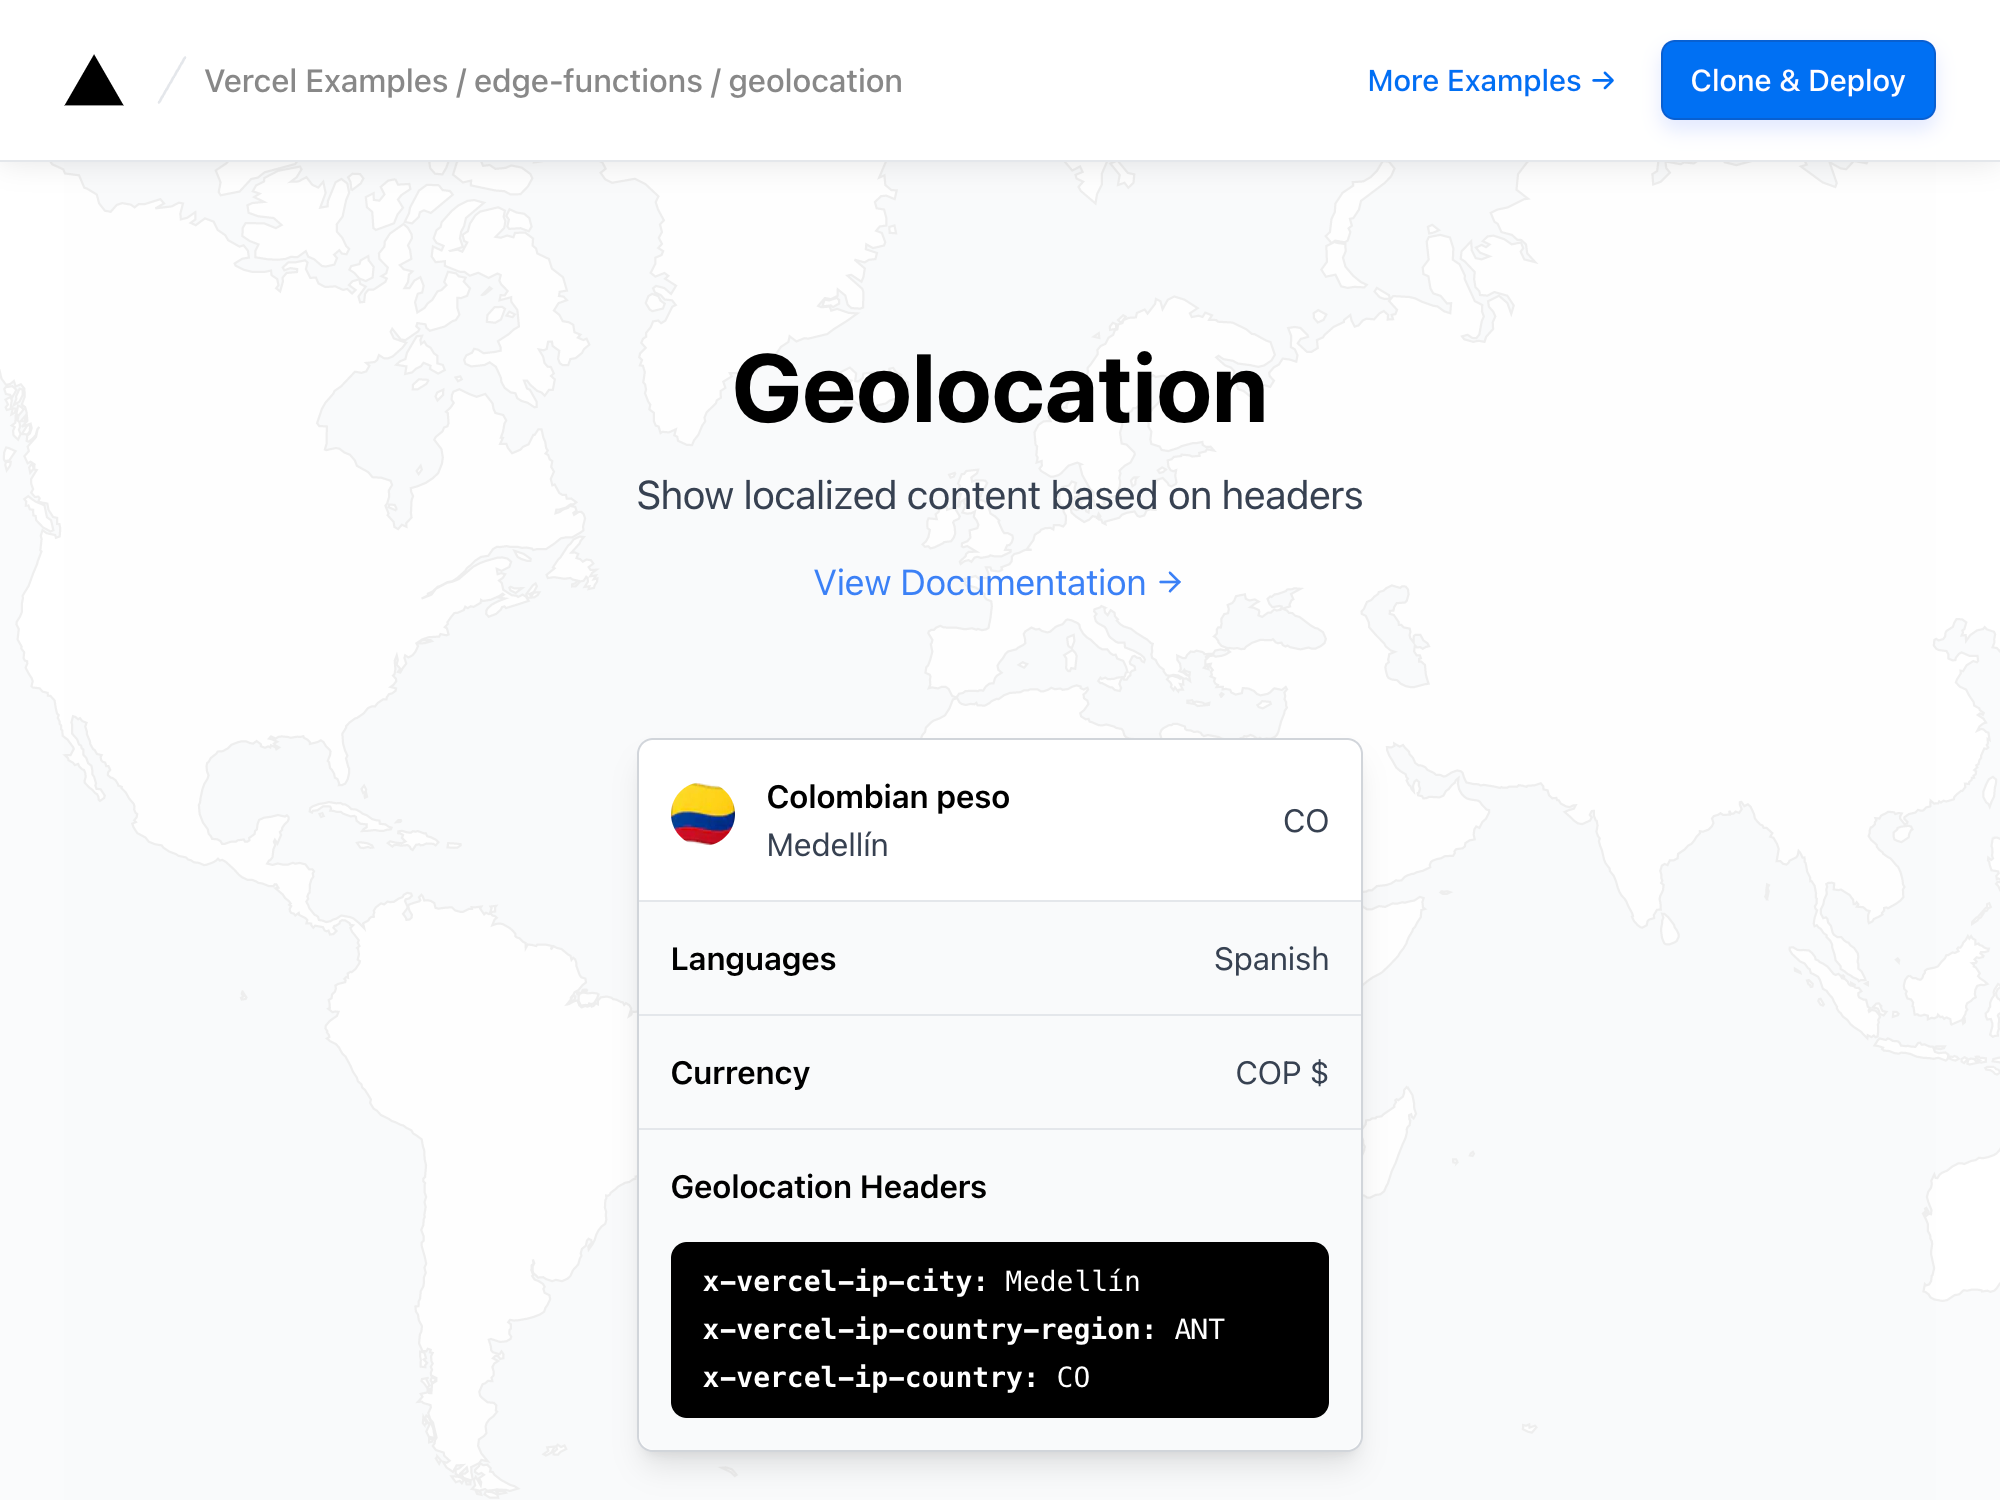 Geolocation in Edge functions